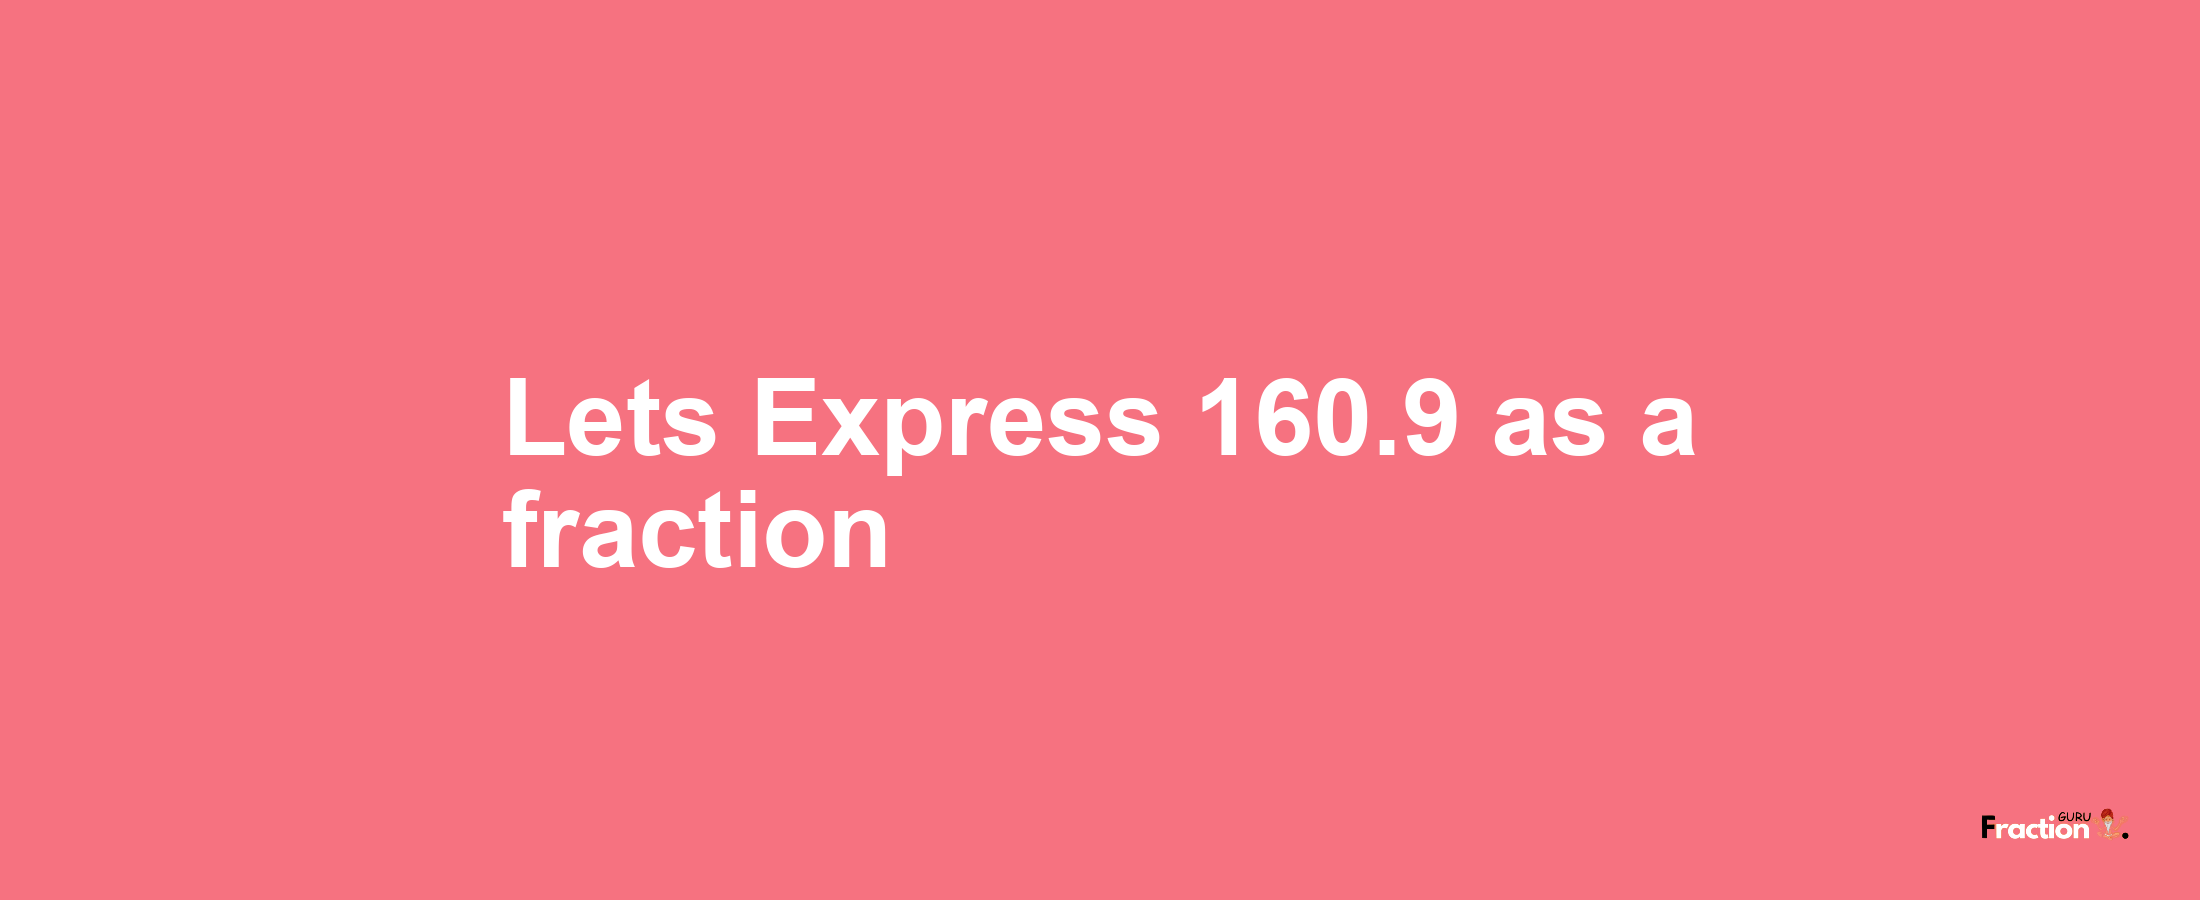 Lets Express 160.9 as afraction